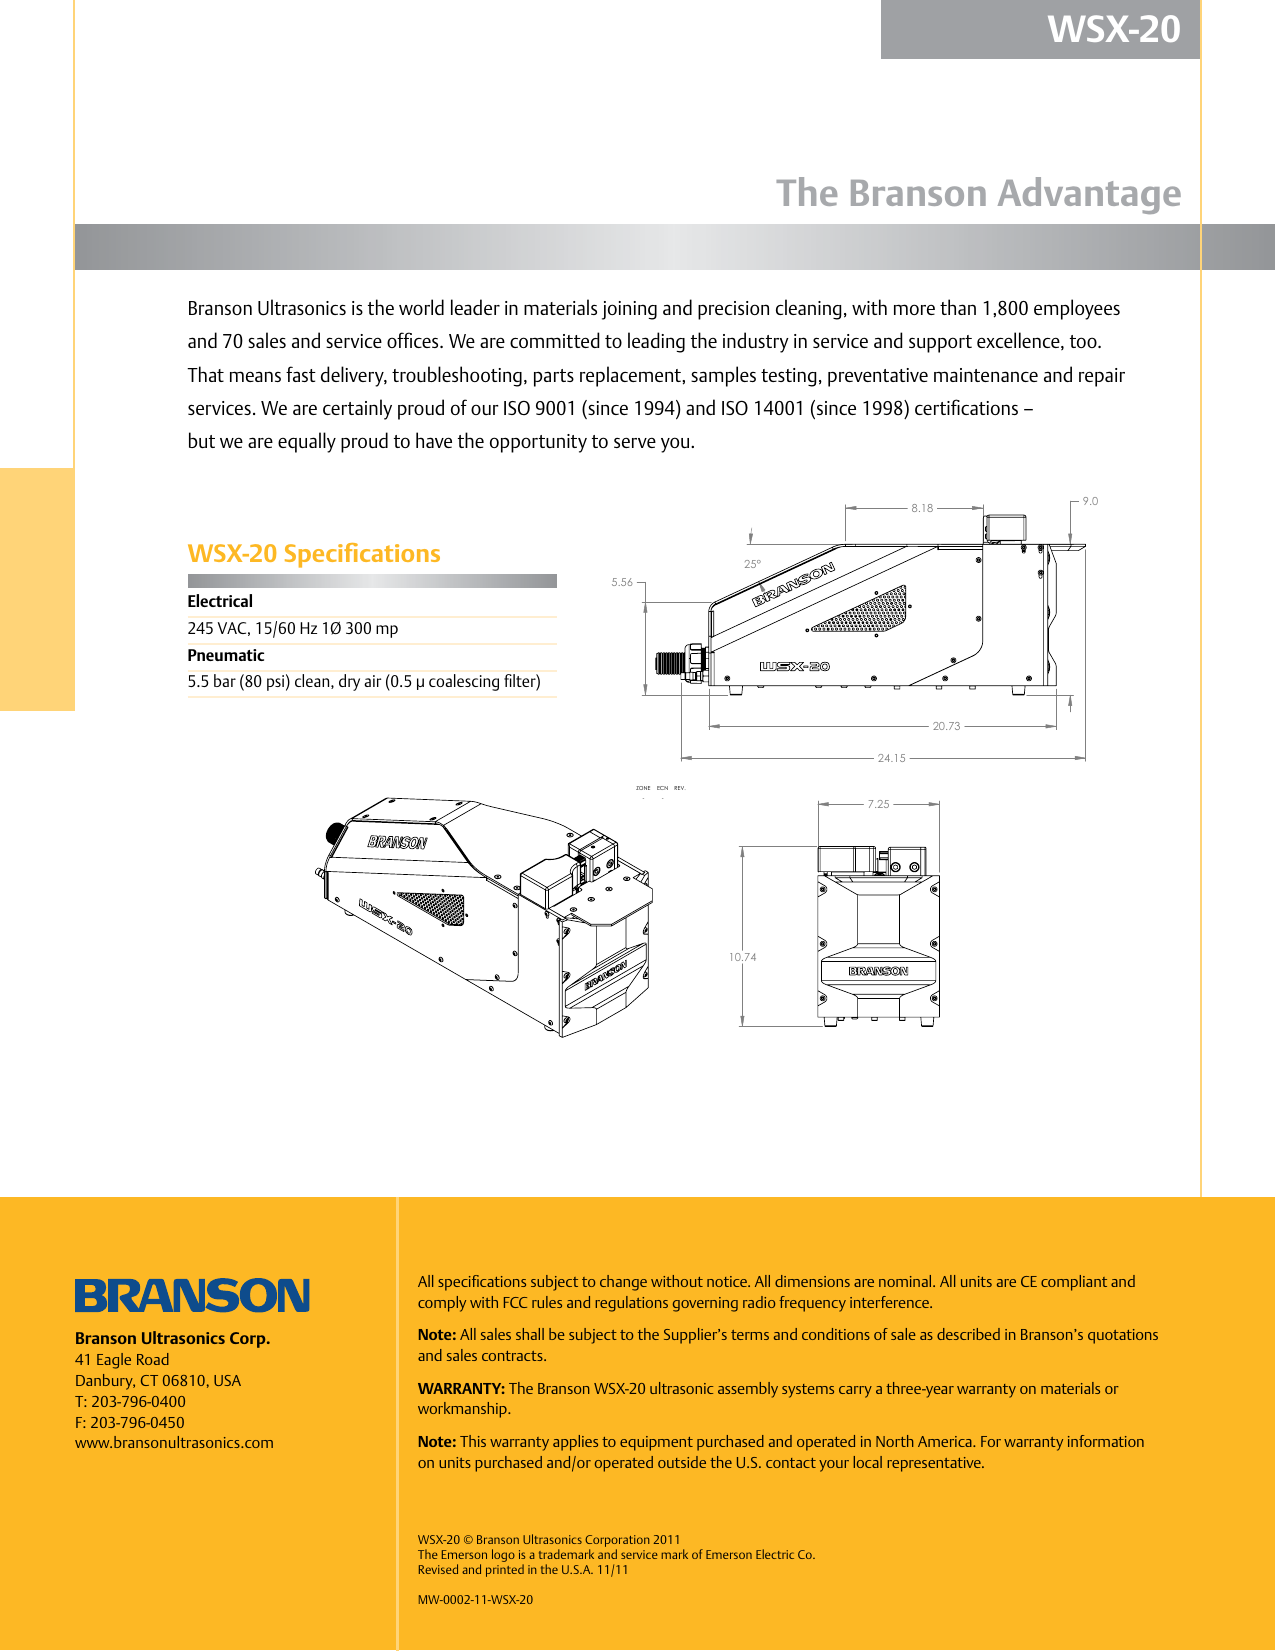 Page 4 of 4 - Emerson Emerson-Wsx-20-Specification-Sheet- WSX-20  Emerson-wsx-20-specification-sheet